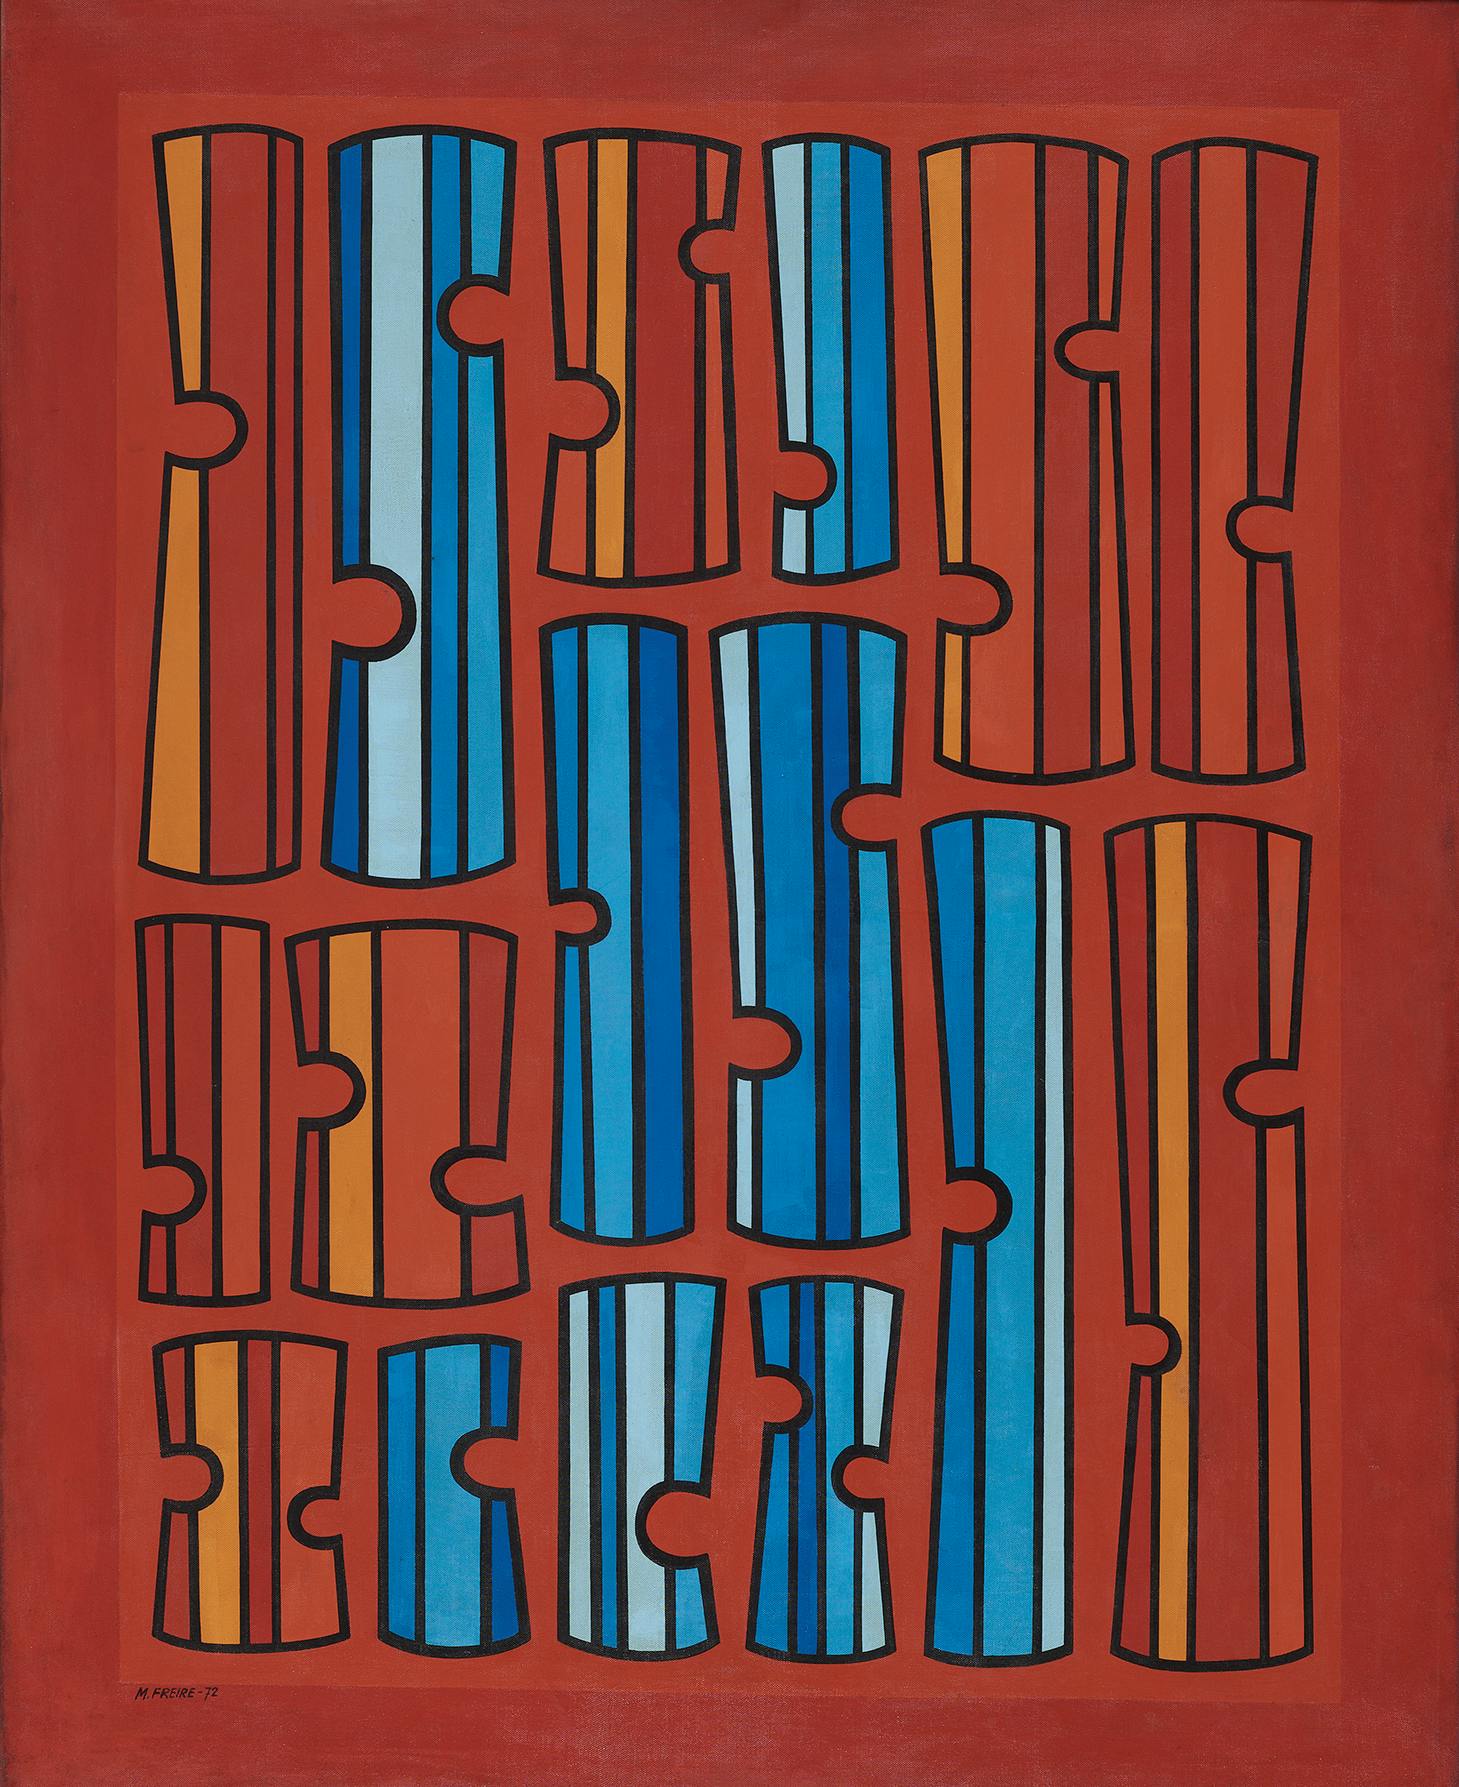 A painting of abstract red, orange, and blue shapes on a red background.